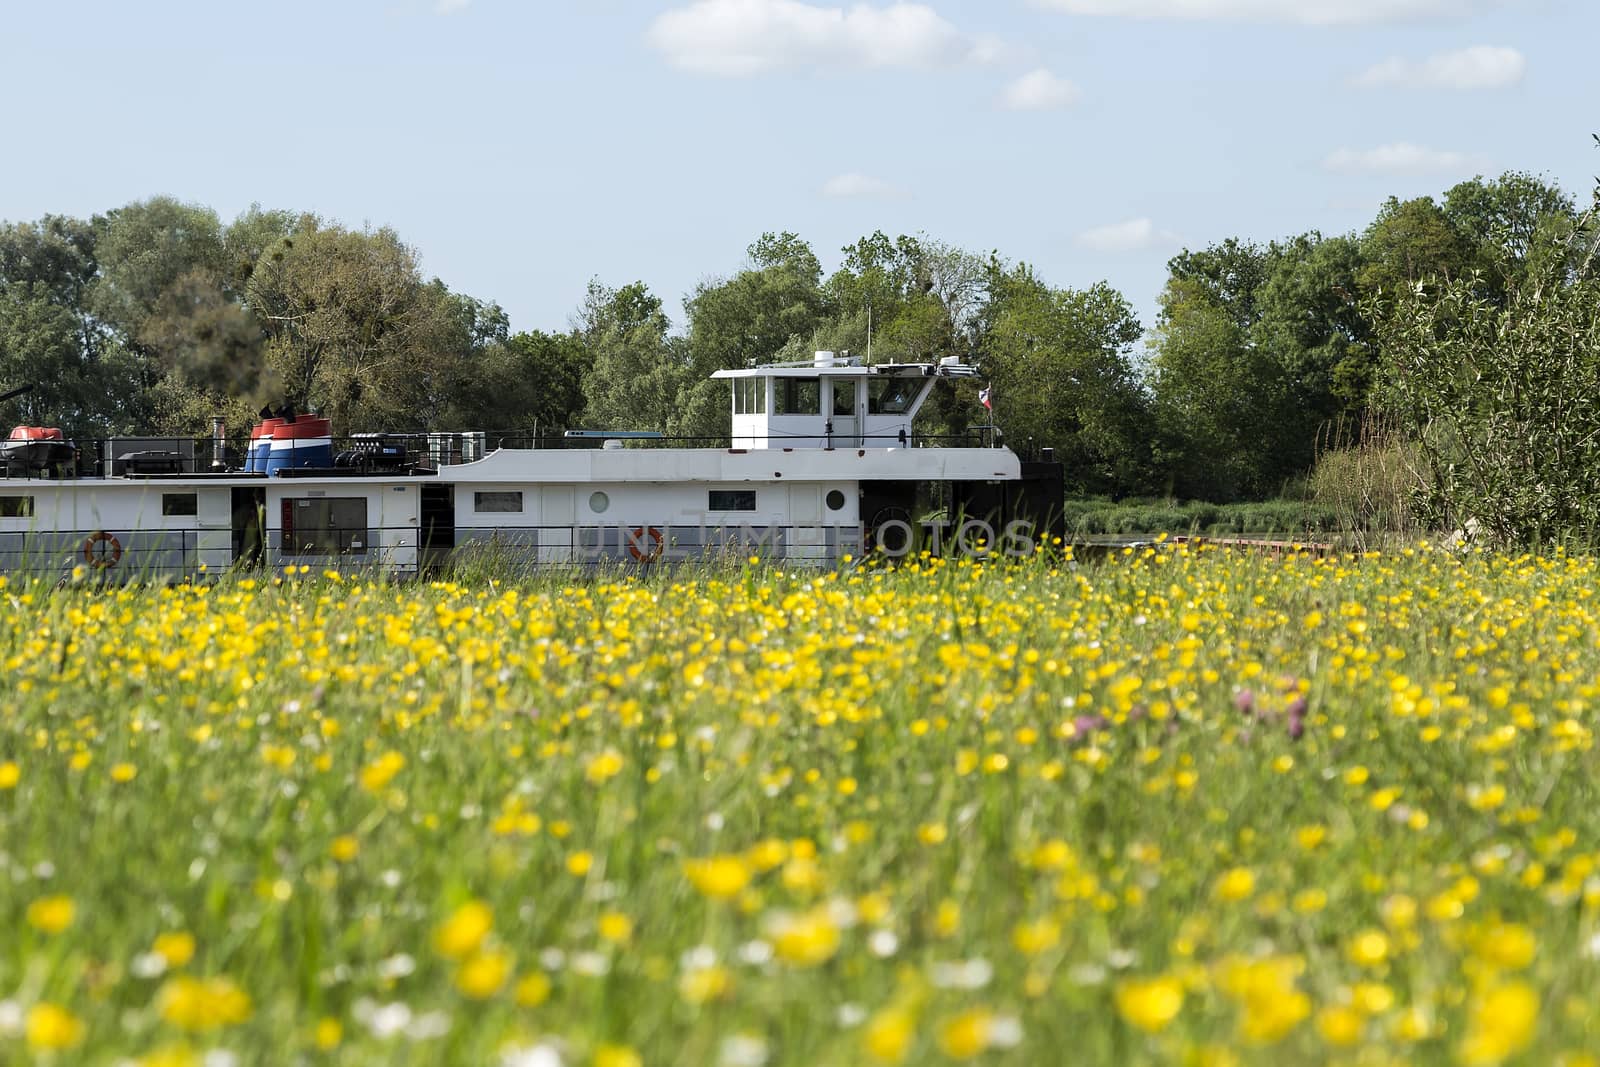 A ship in the river of Seine, France in the background of a meadow filled with flowers